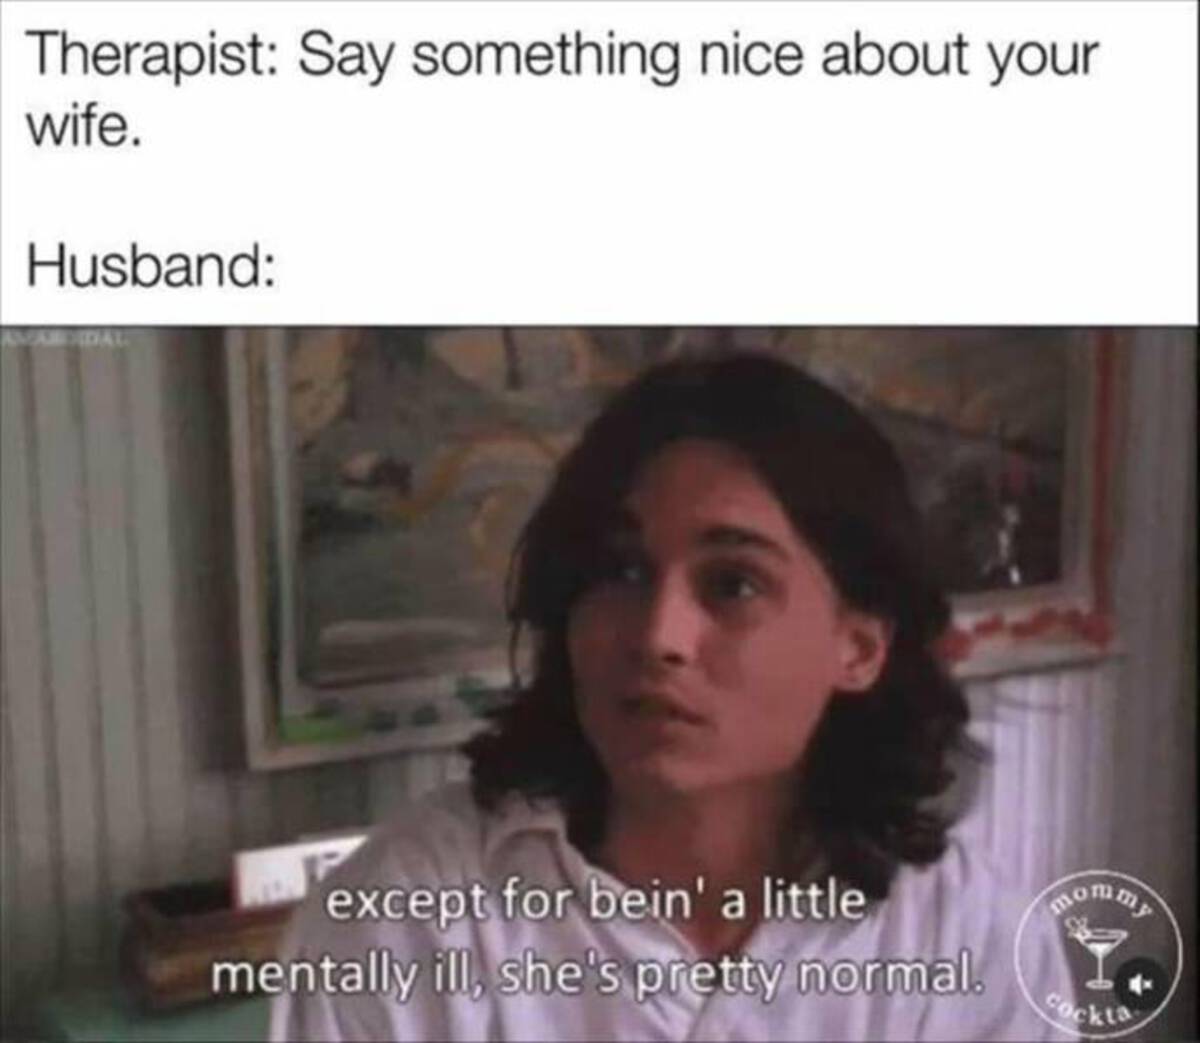 photo caption - Therapist Say something nice about your wife. Husband Didal except for bein' a little mentally ill, she's pretty normal. mommy Cockta